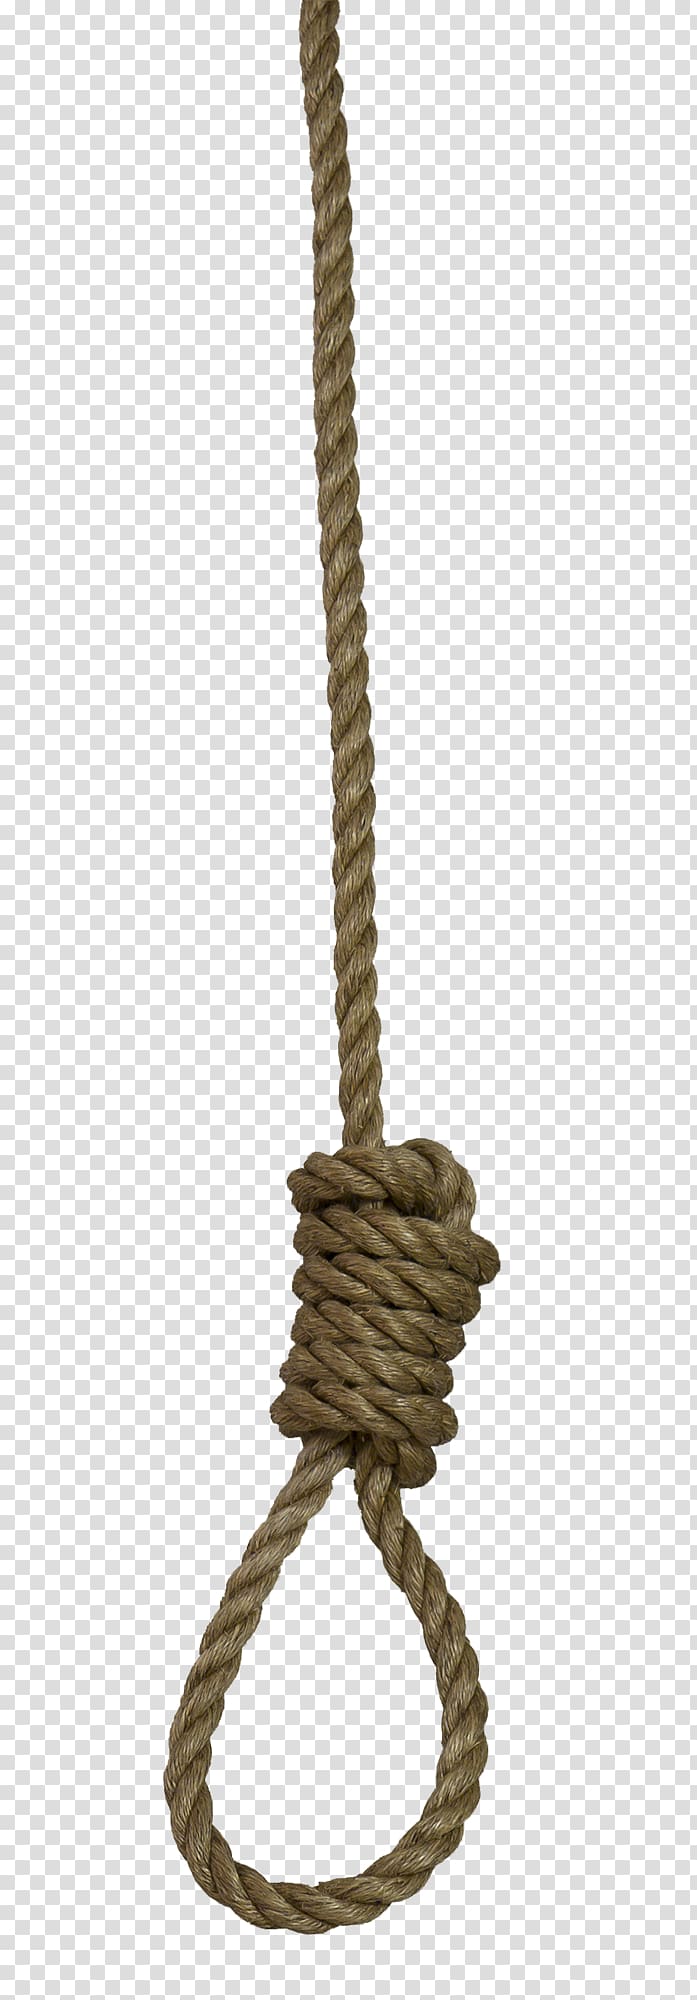 Pull Rope Hd Transparent, Brown Hanging Rope To Pull The Material Png Free,  Rope Clipart, Hemp Rope, Brown PNG Image For Free Download